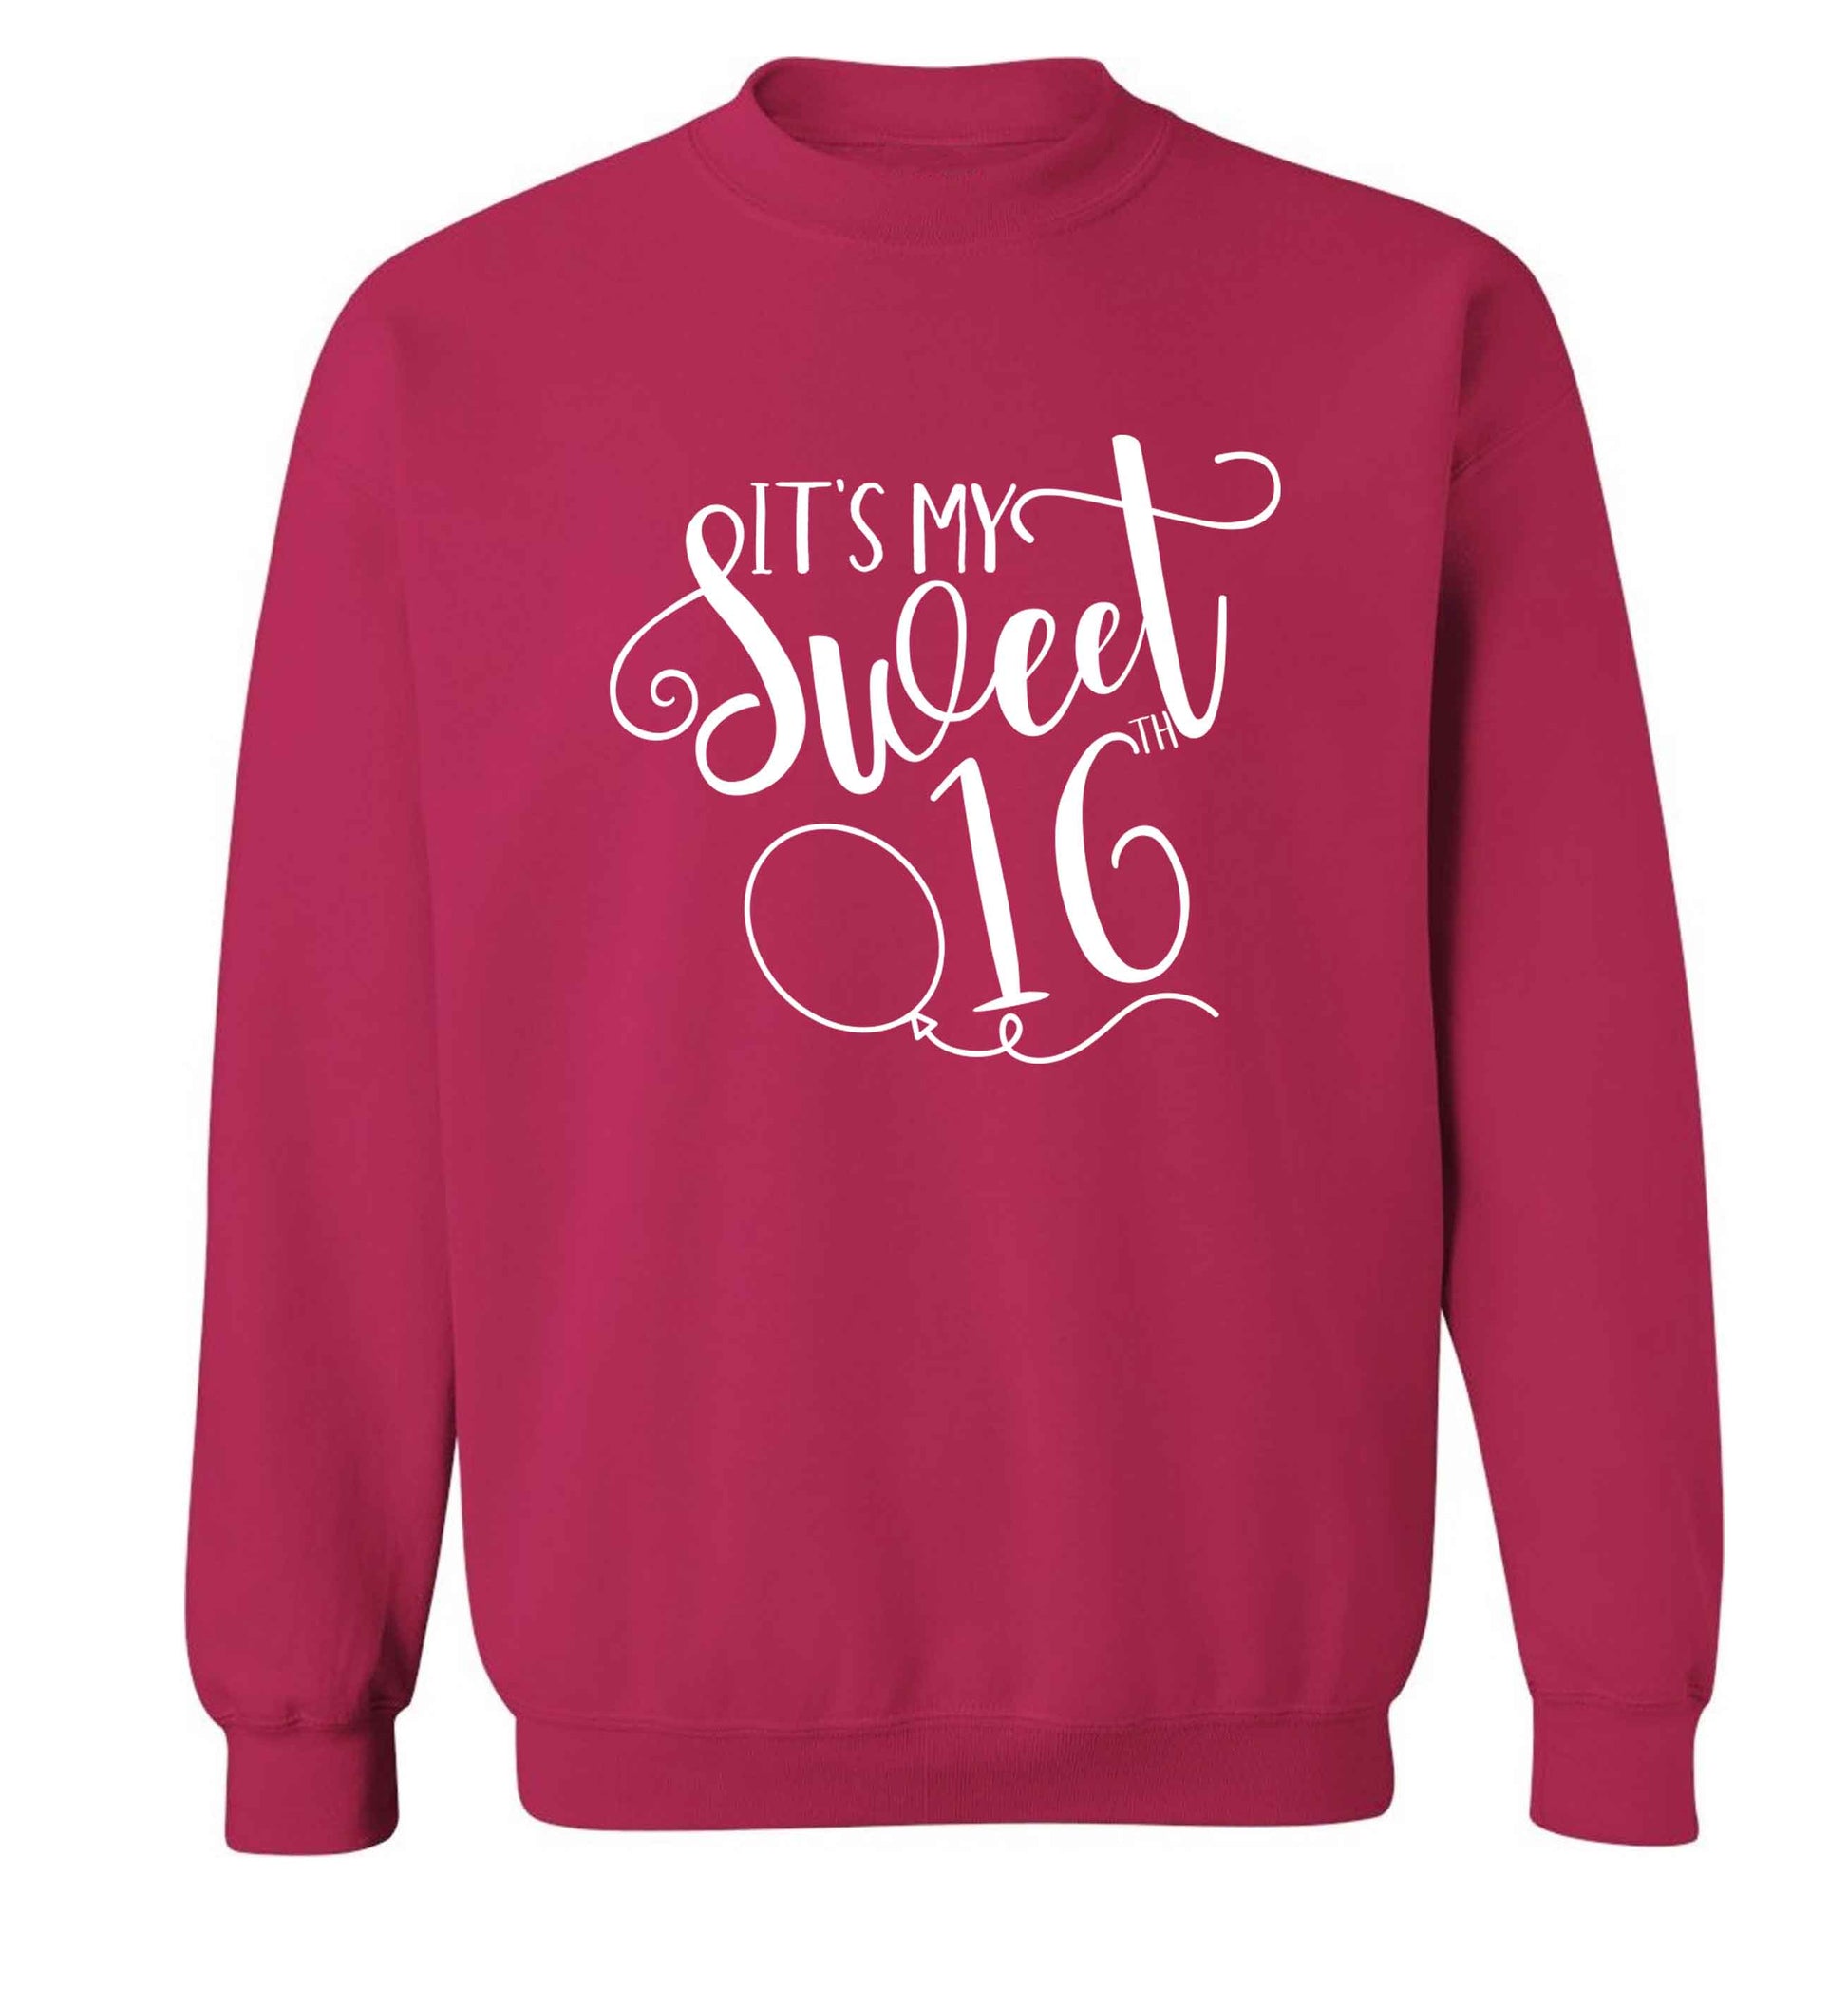 It's my sweet 16thadult's unisex pink sweater 2XL